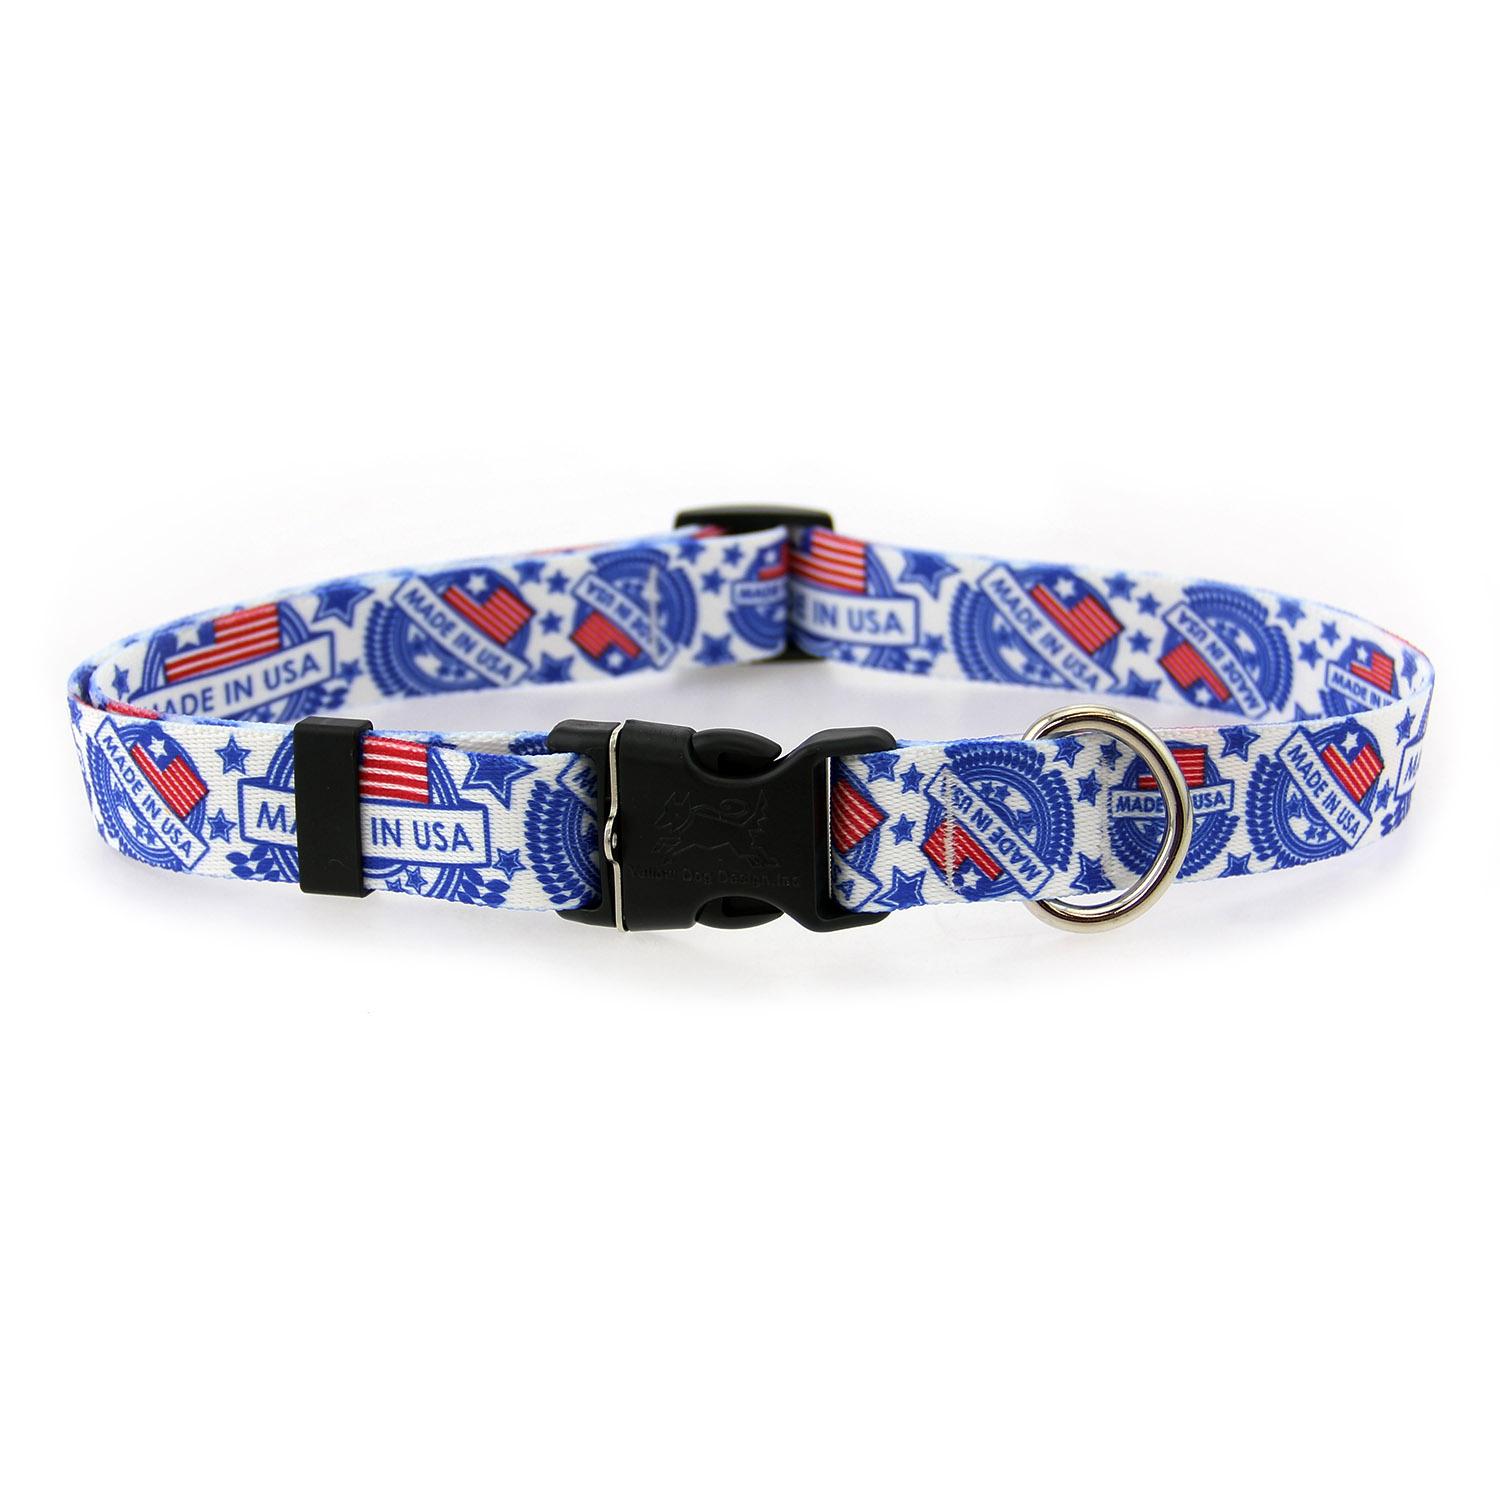 Made in USA Dog Collar by Yellow Dog - White